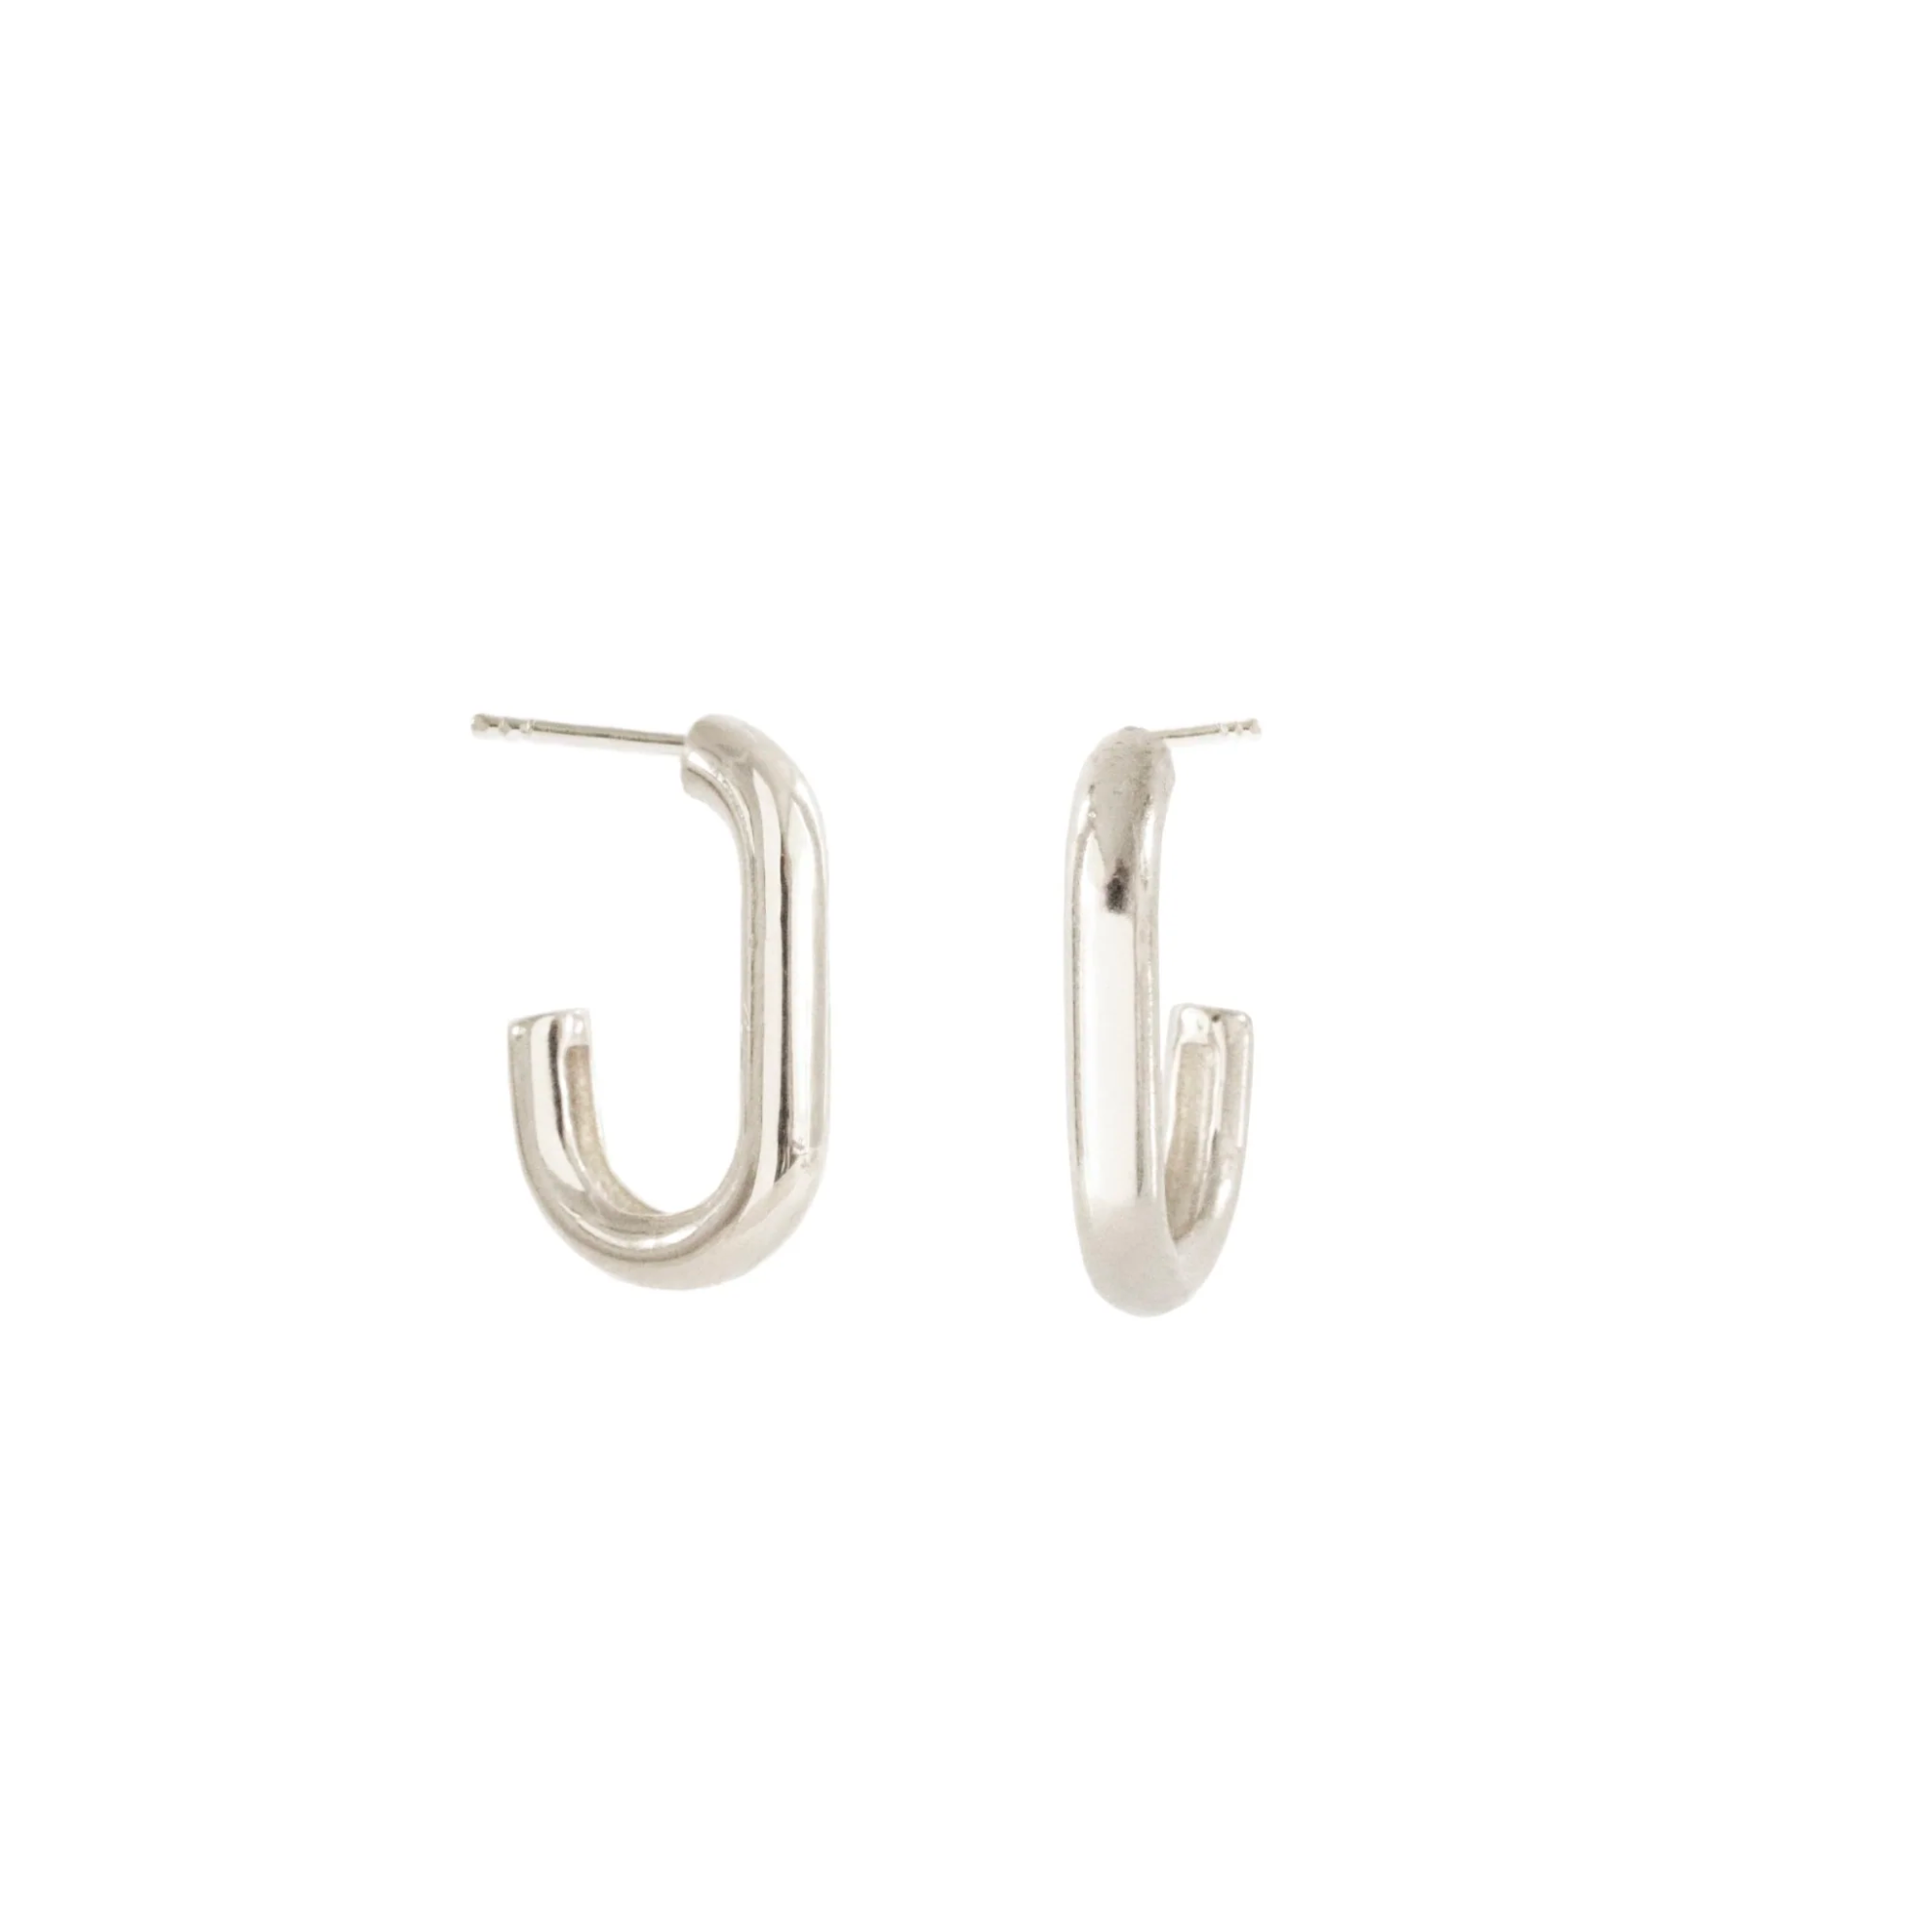 Poise Oval Hoops - Silver